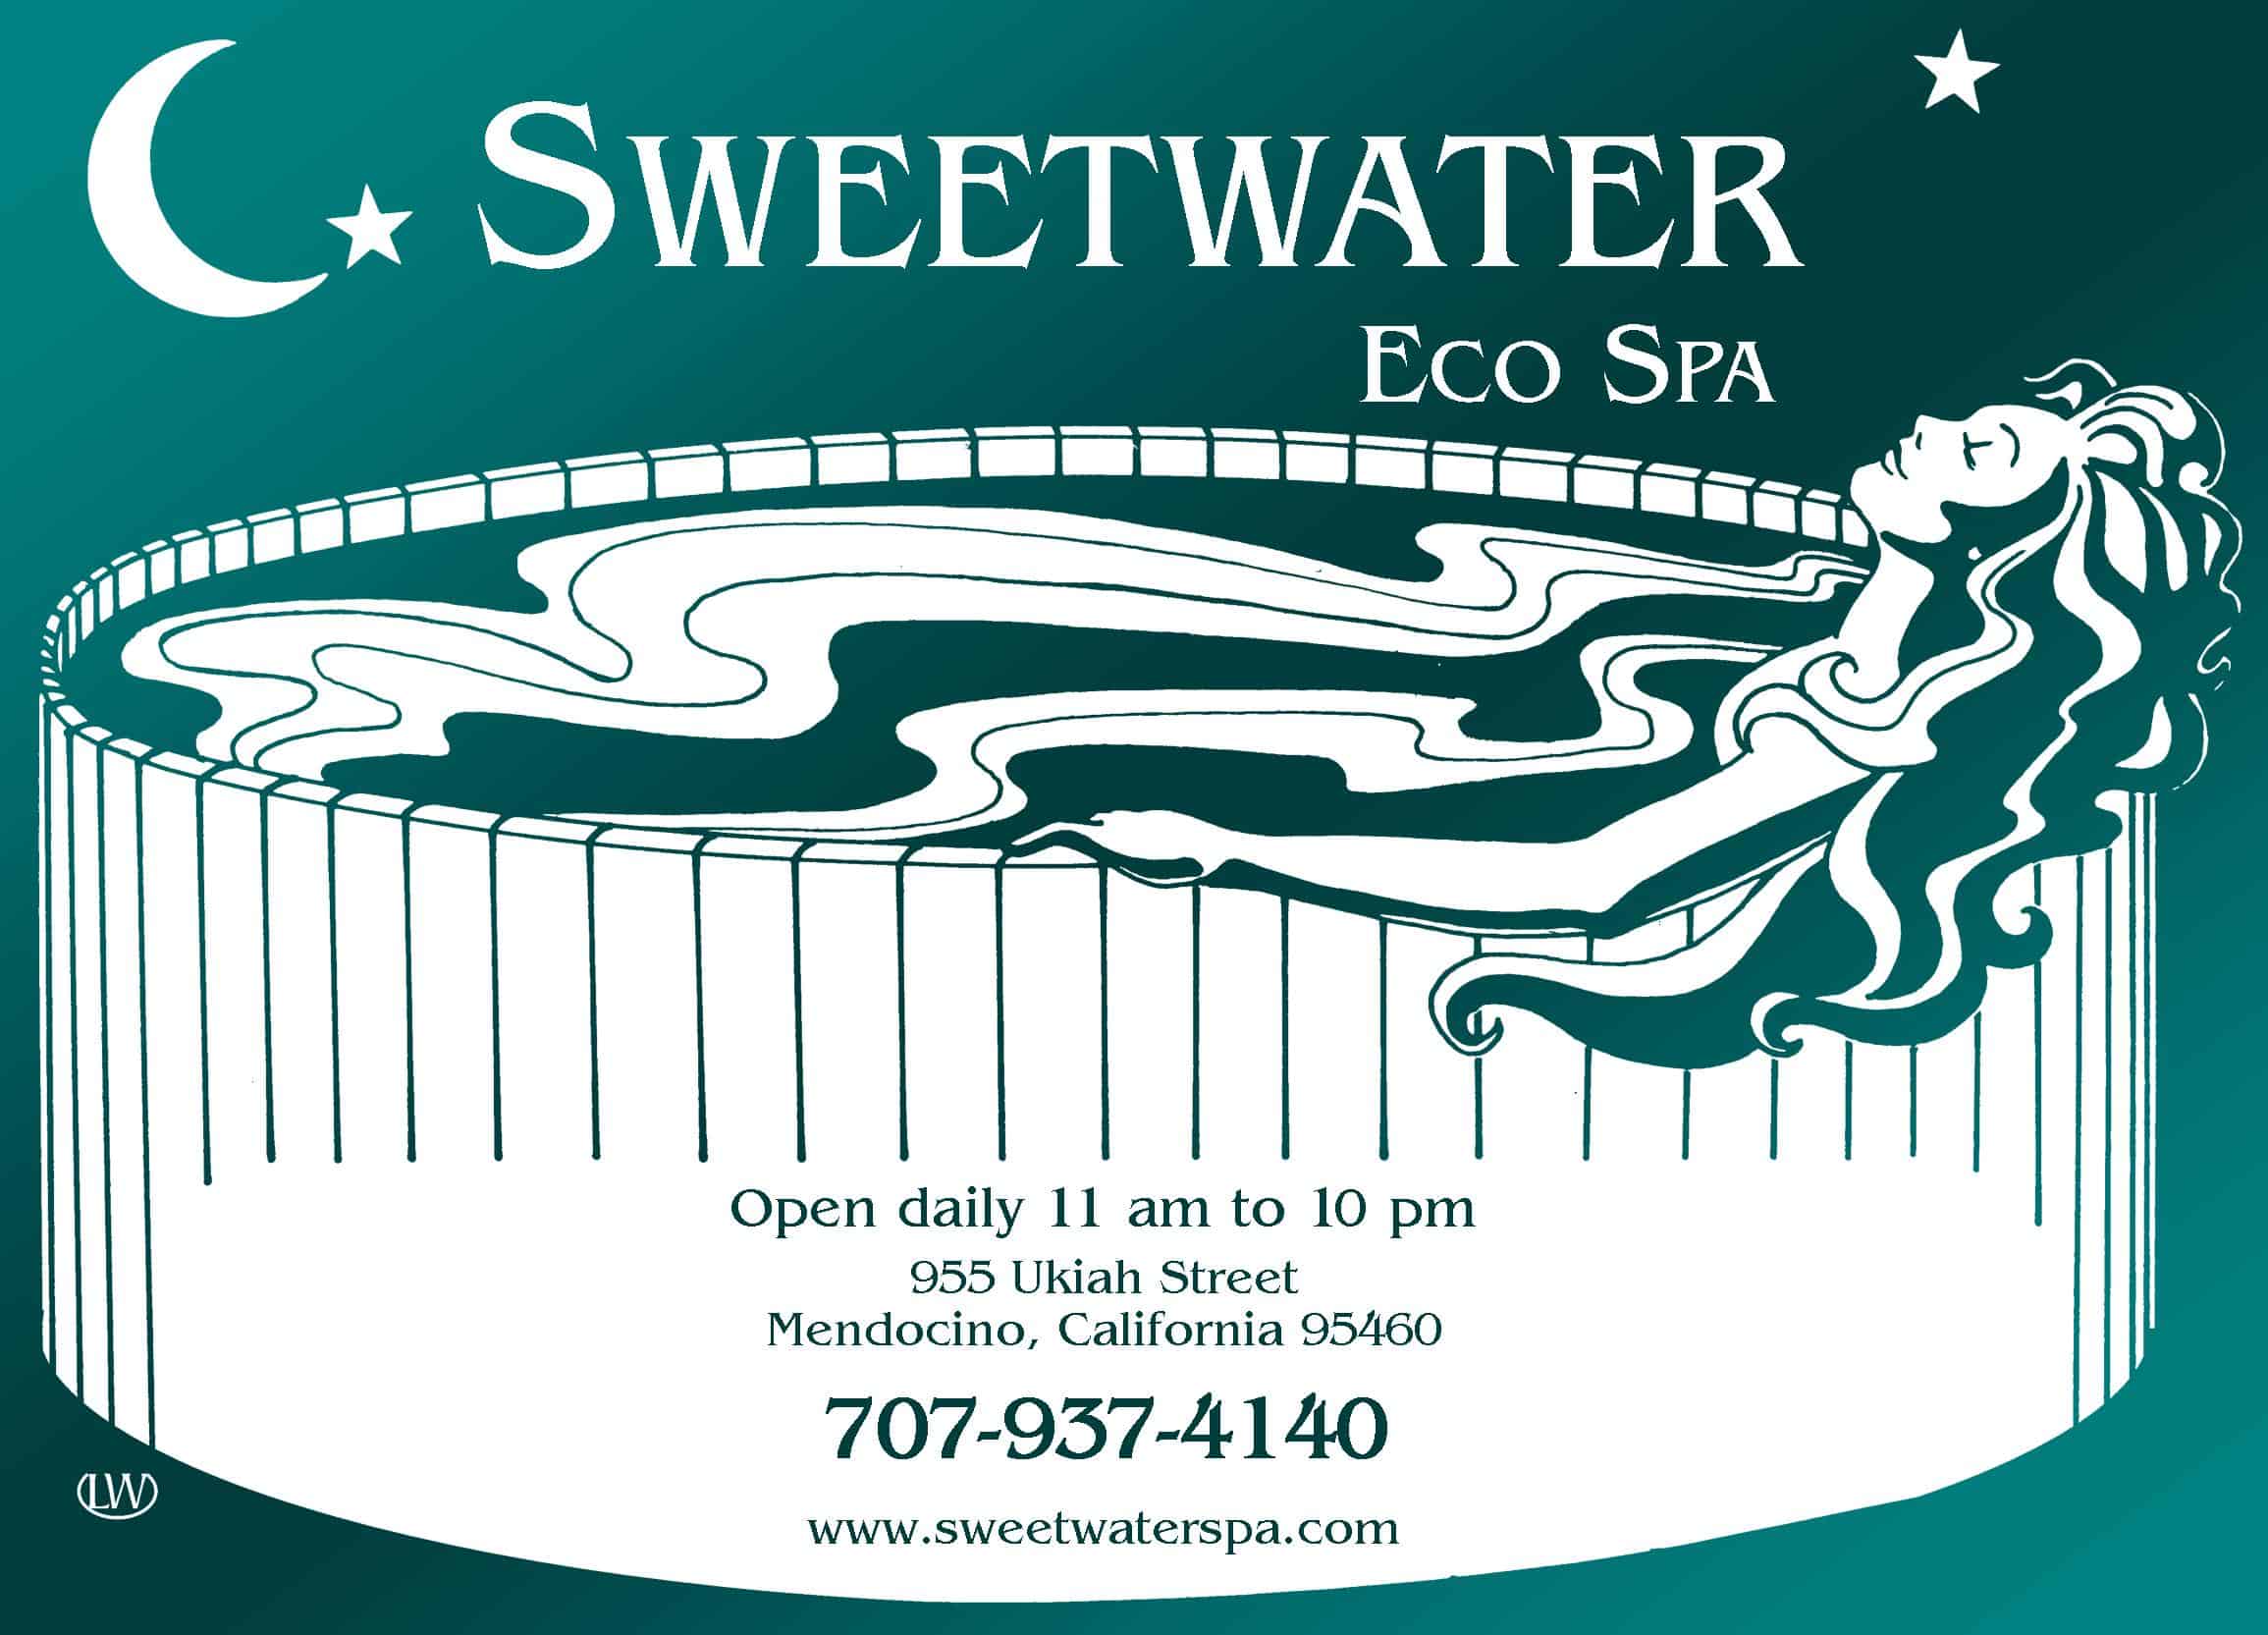 Sweetwater Eco Spa - Logo